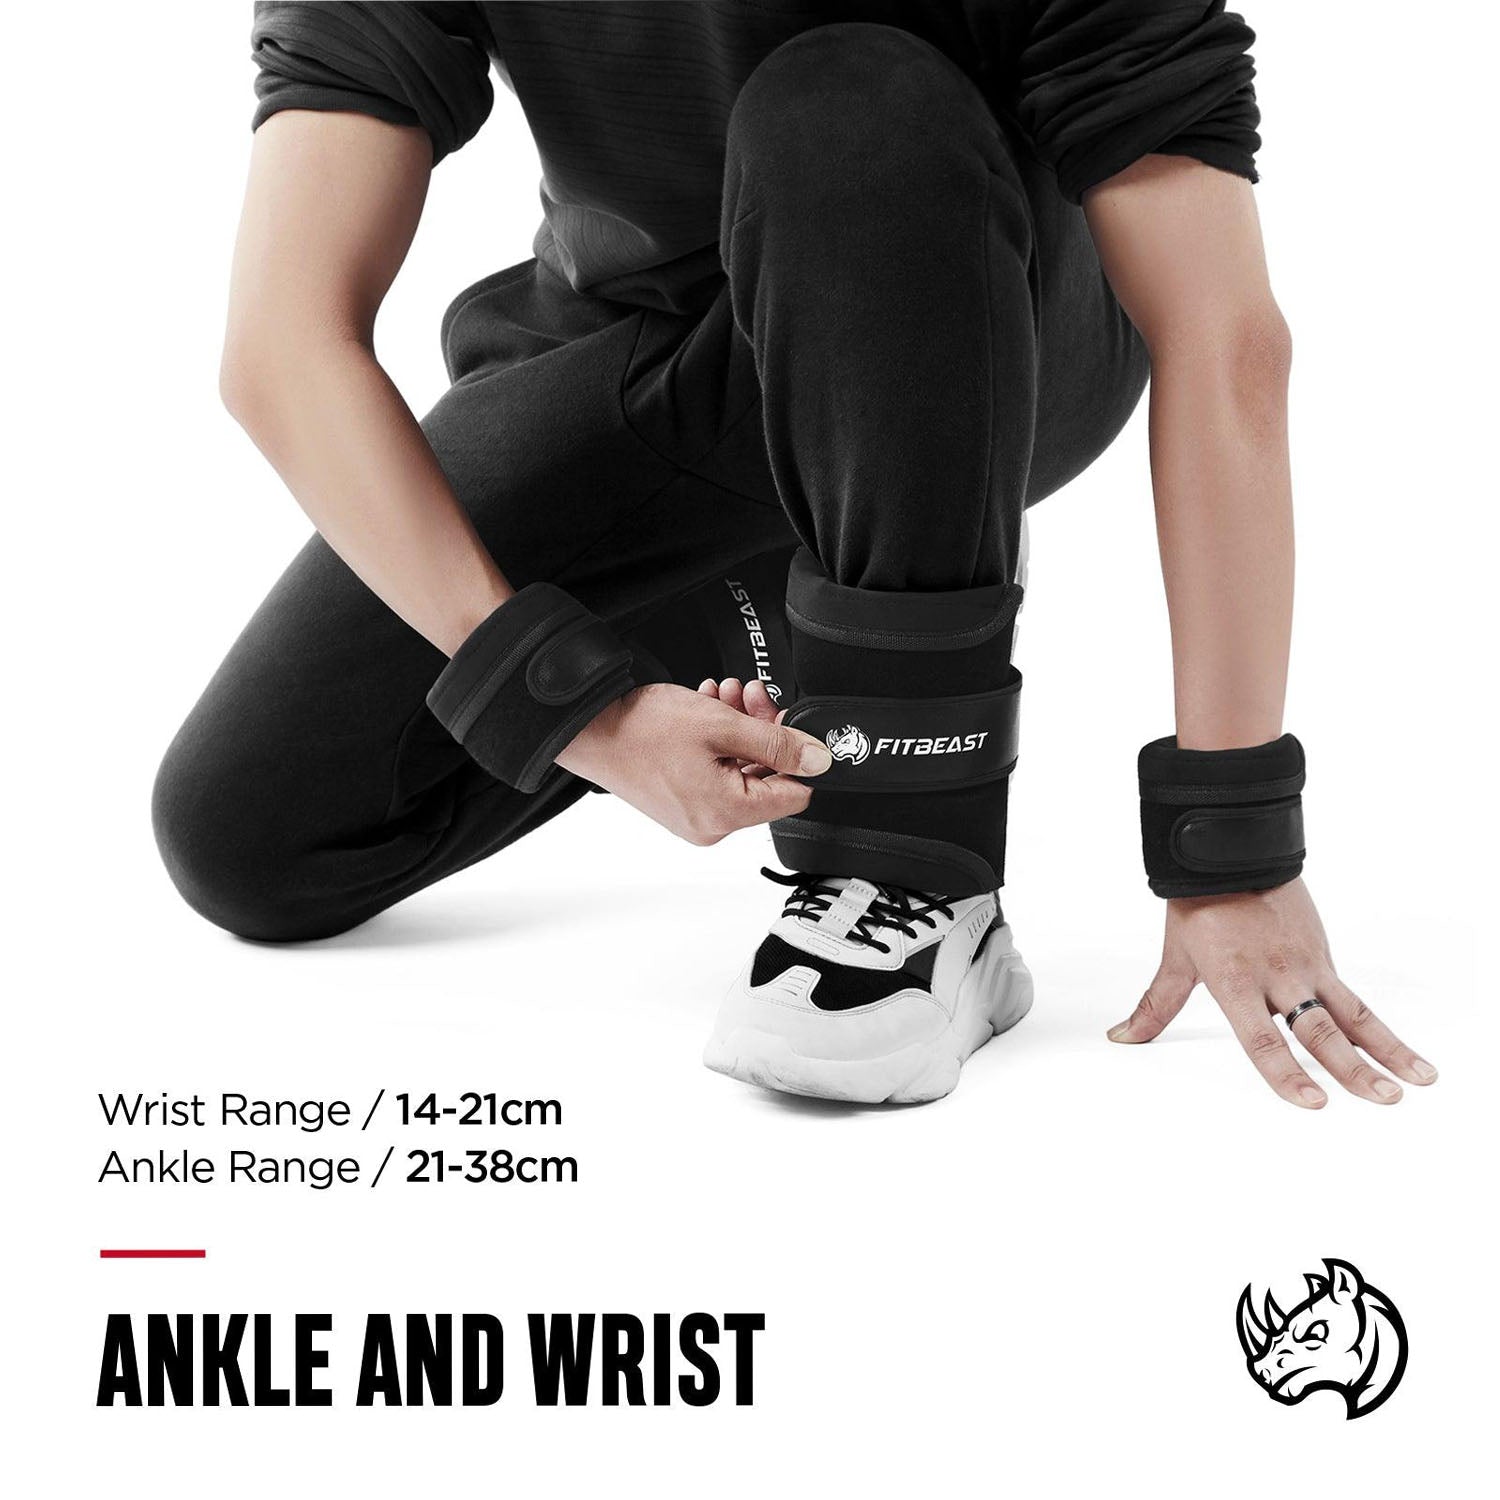 Adjustable Ankle Weights Straps/Belt(1.6Kg to 3.6Kg)for a Pair丨FitBeast